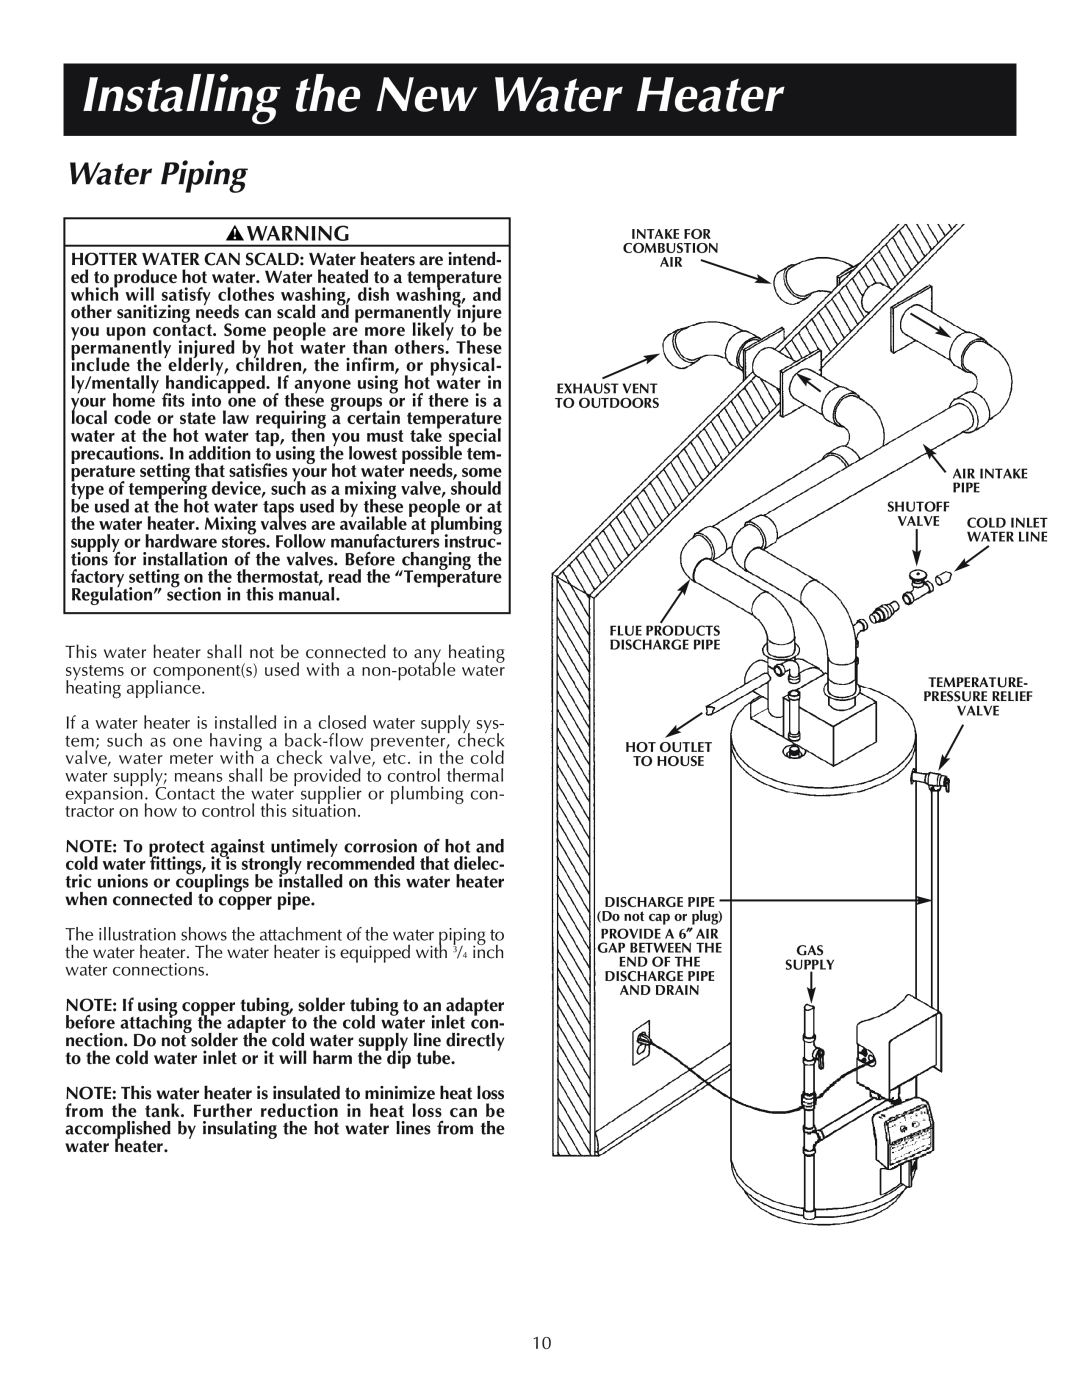 Reliance Water Heaters 11-03, 606, 184333-001 instruction manual Installing the New Water Heater, Water Piping 